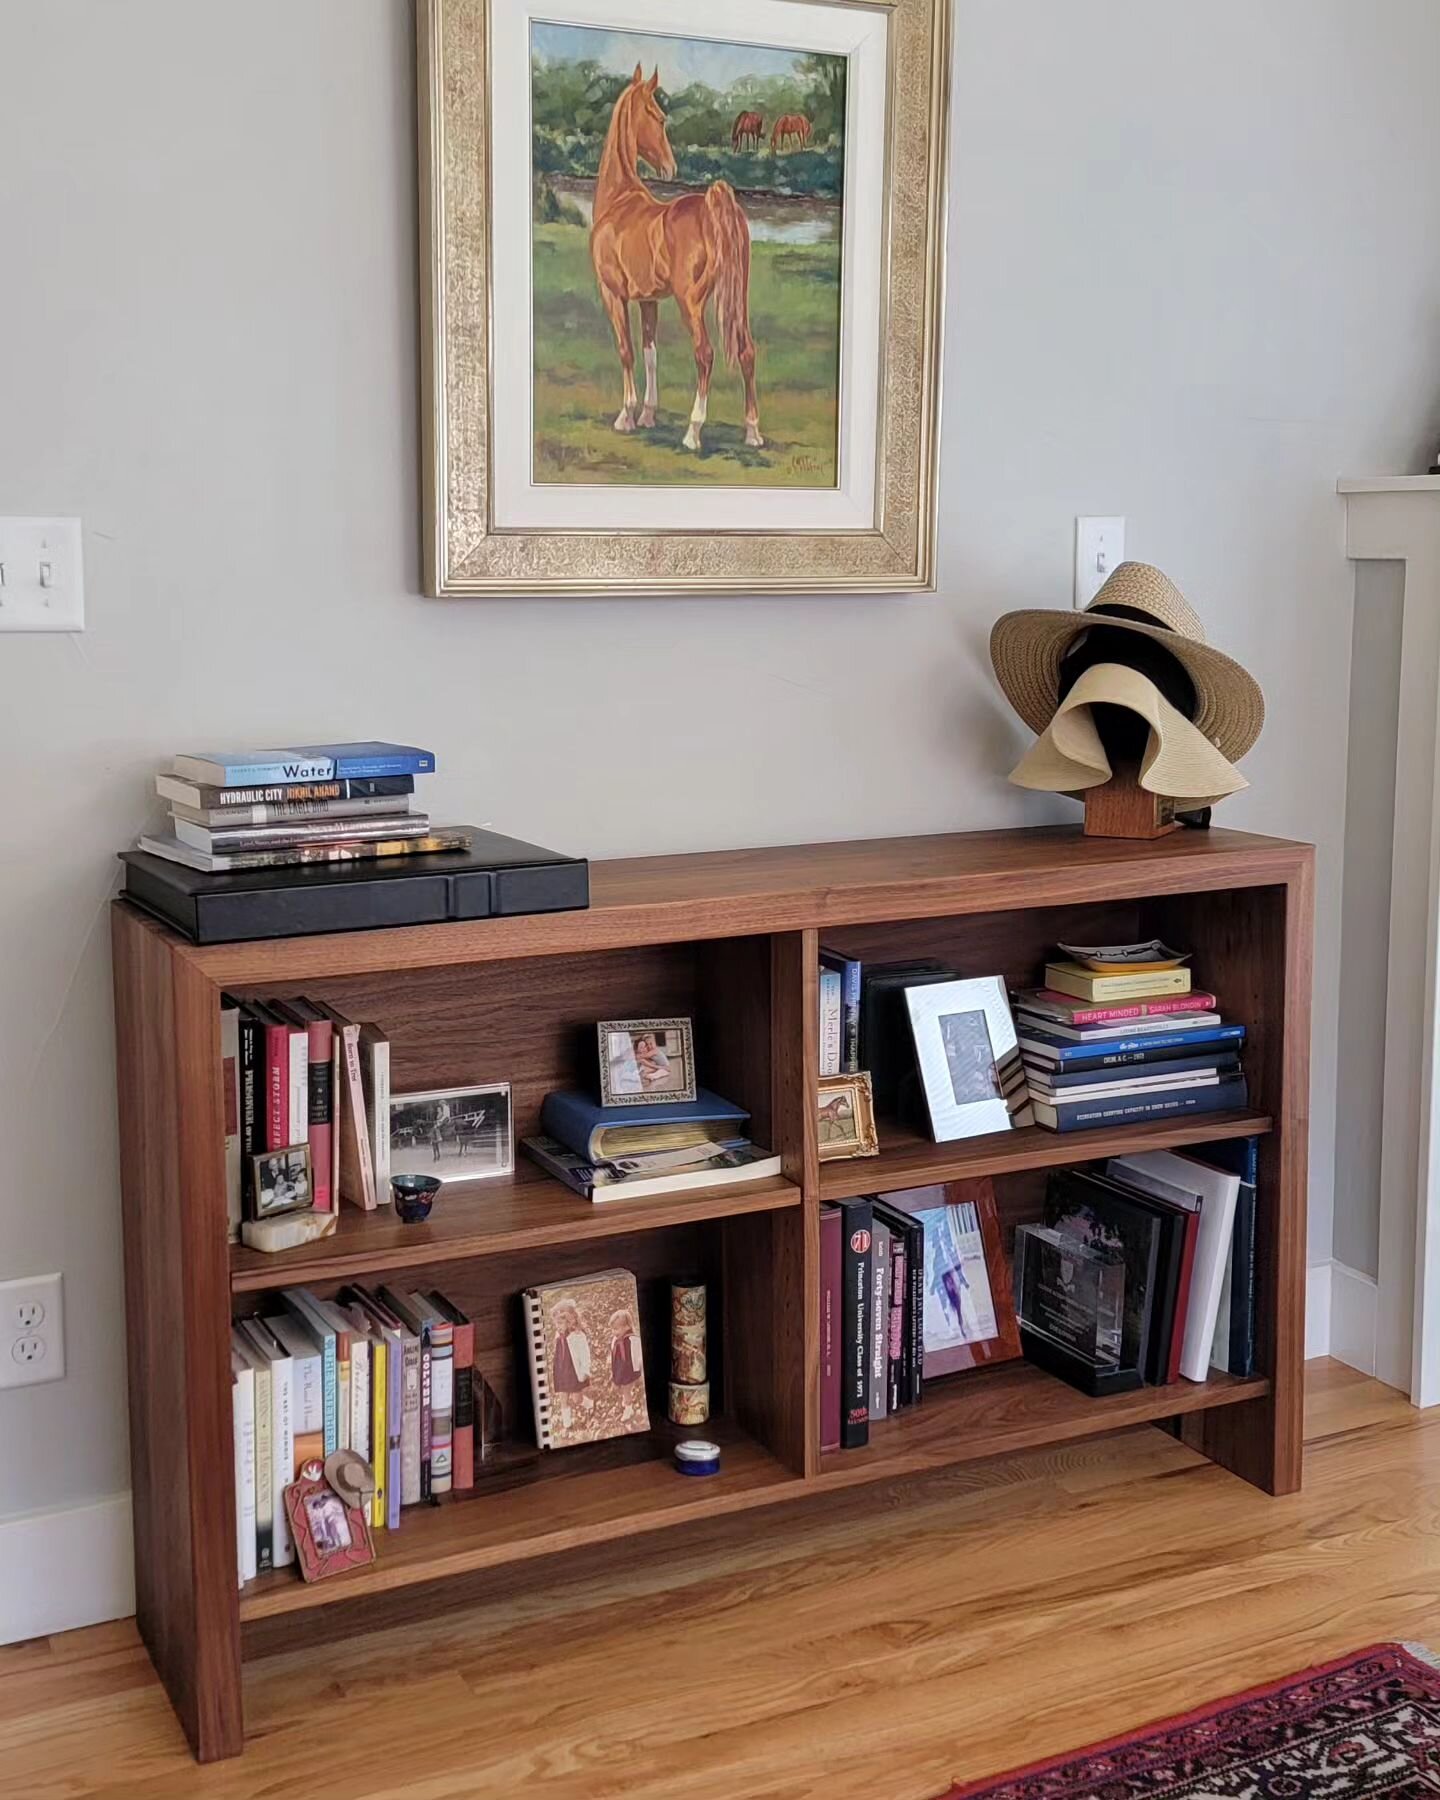 In a recent visit with a client, we got a peek back at some of our furniture in the wild. Thanks to Mrs. London for her continued patronage. There isn't much furniture in her house that we didn't build at this point!

Shown here is a custom bookshelf